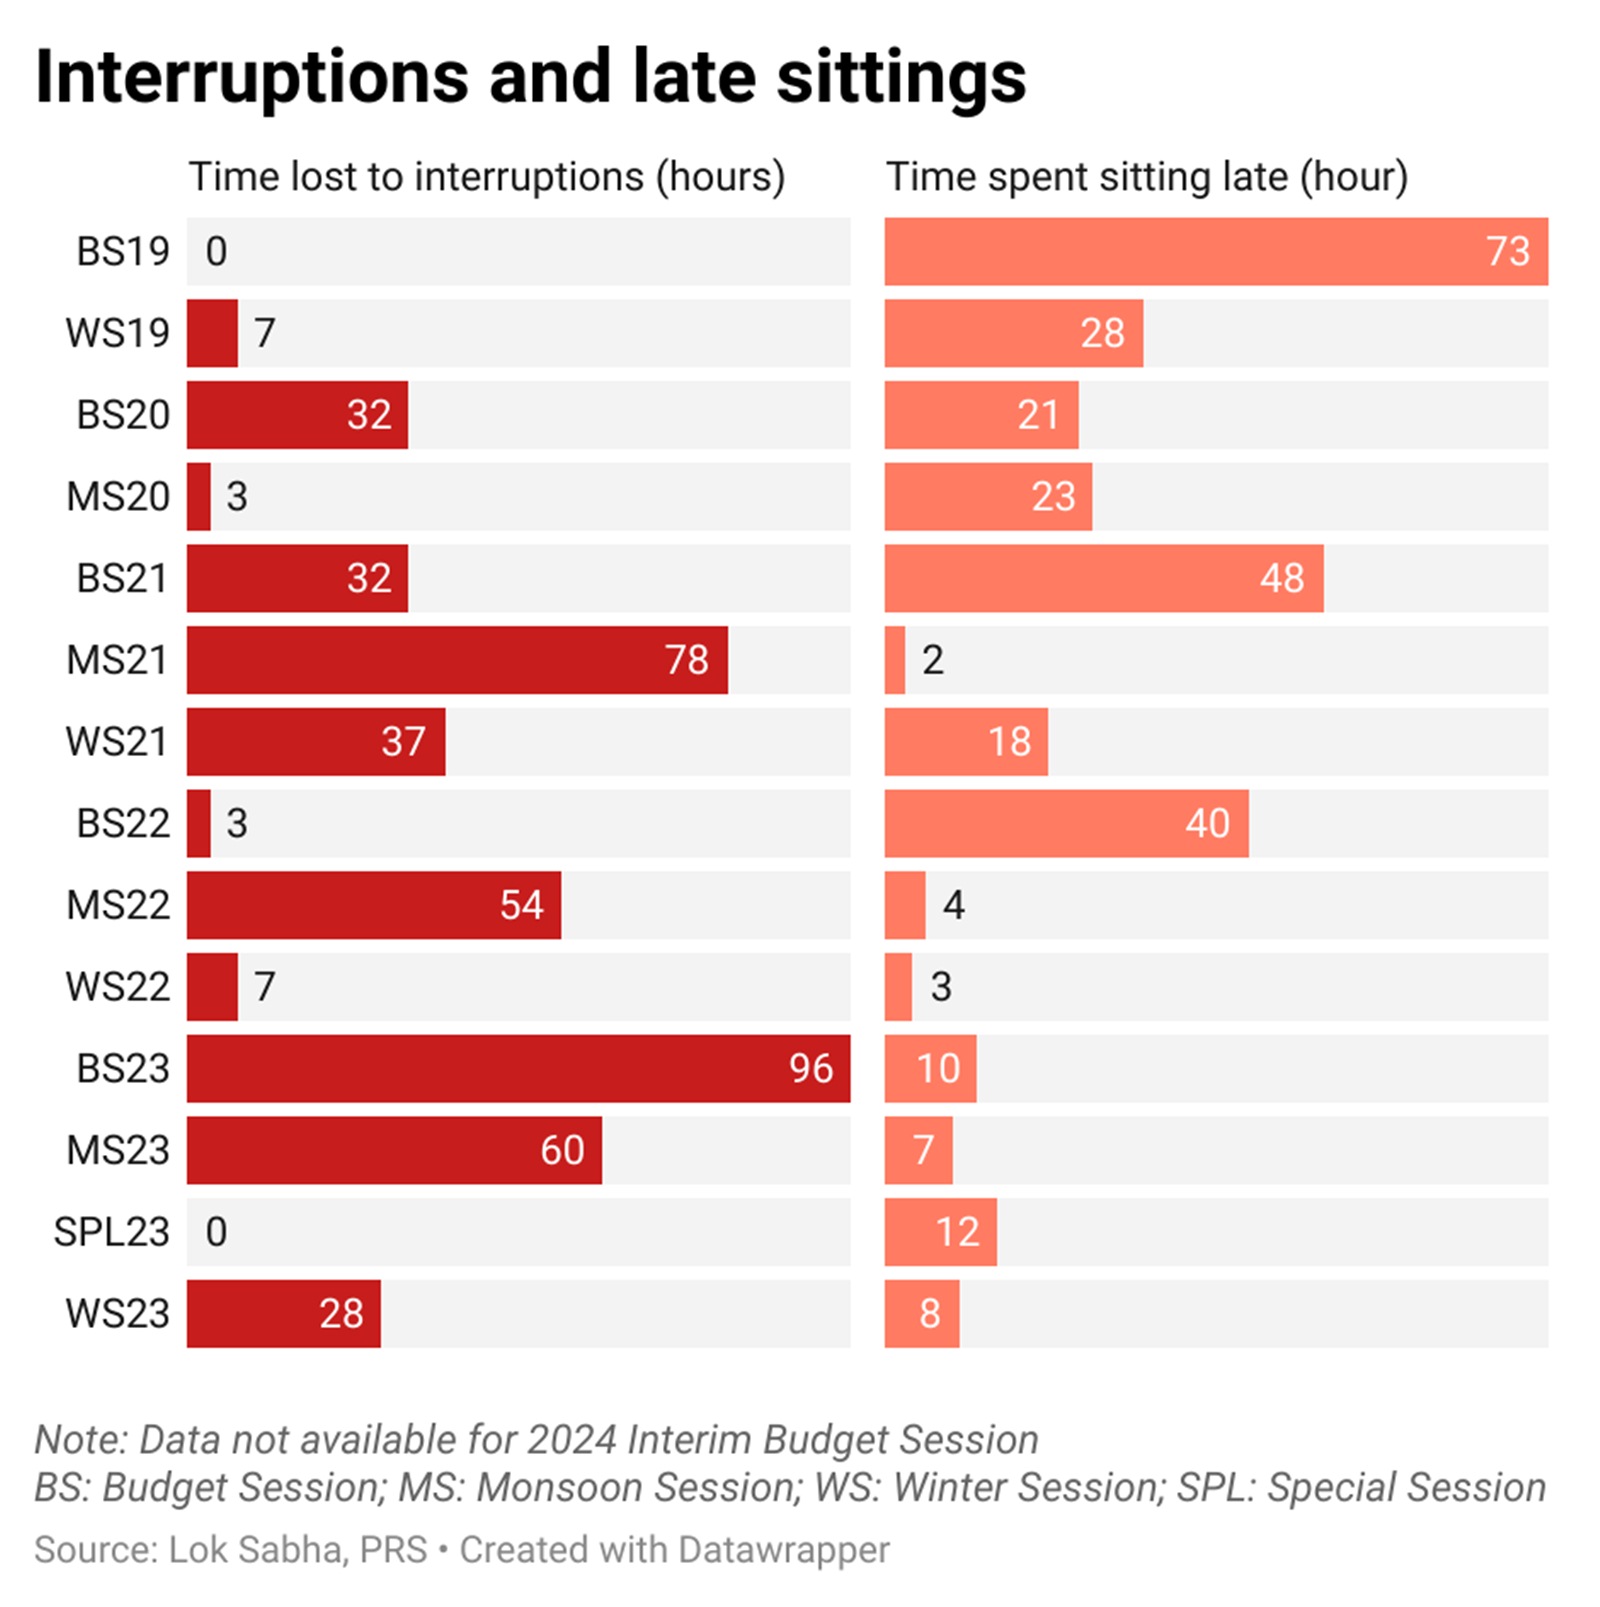 Interruptions and late sittings